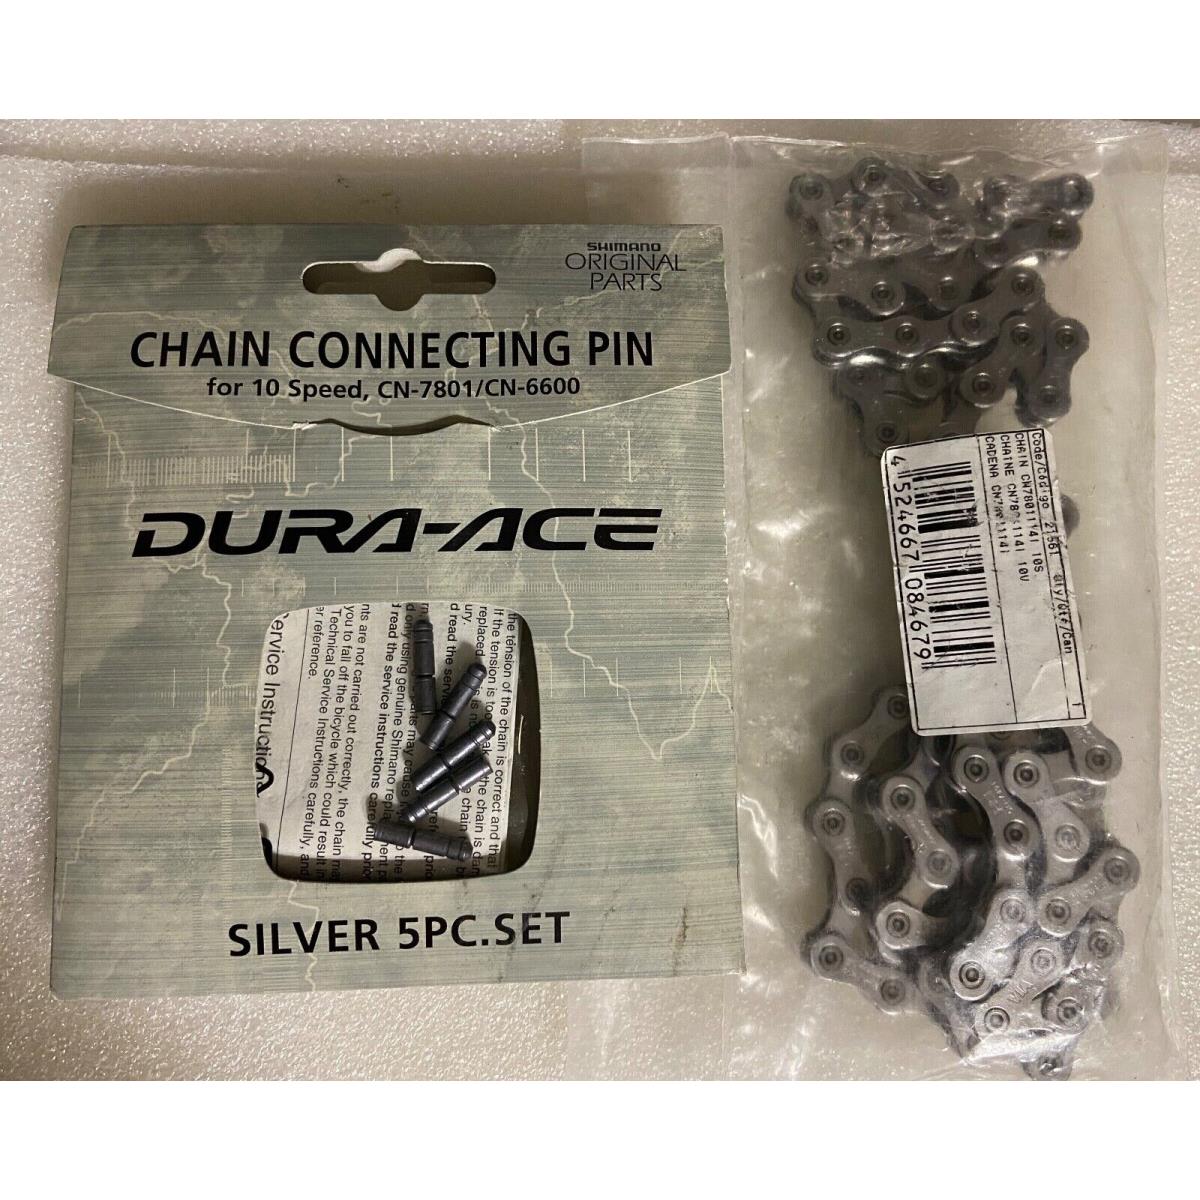 Nos Shimano 7800 Dura-ace CN-7801 10-speed 114L Road Bike Chain Old Stock